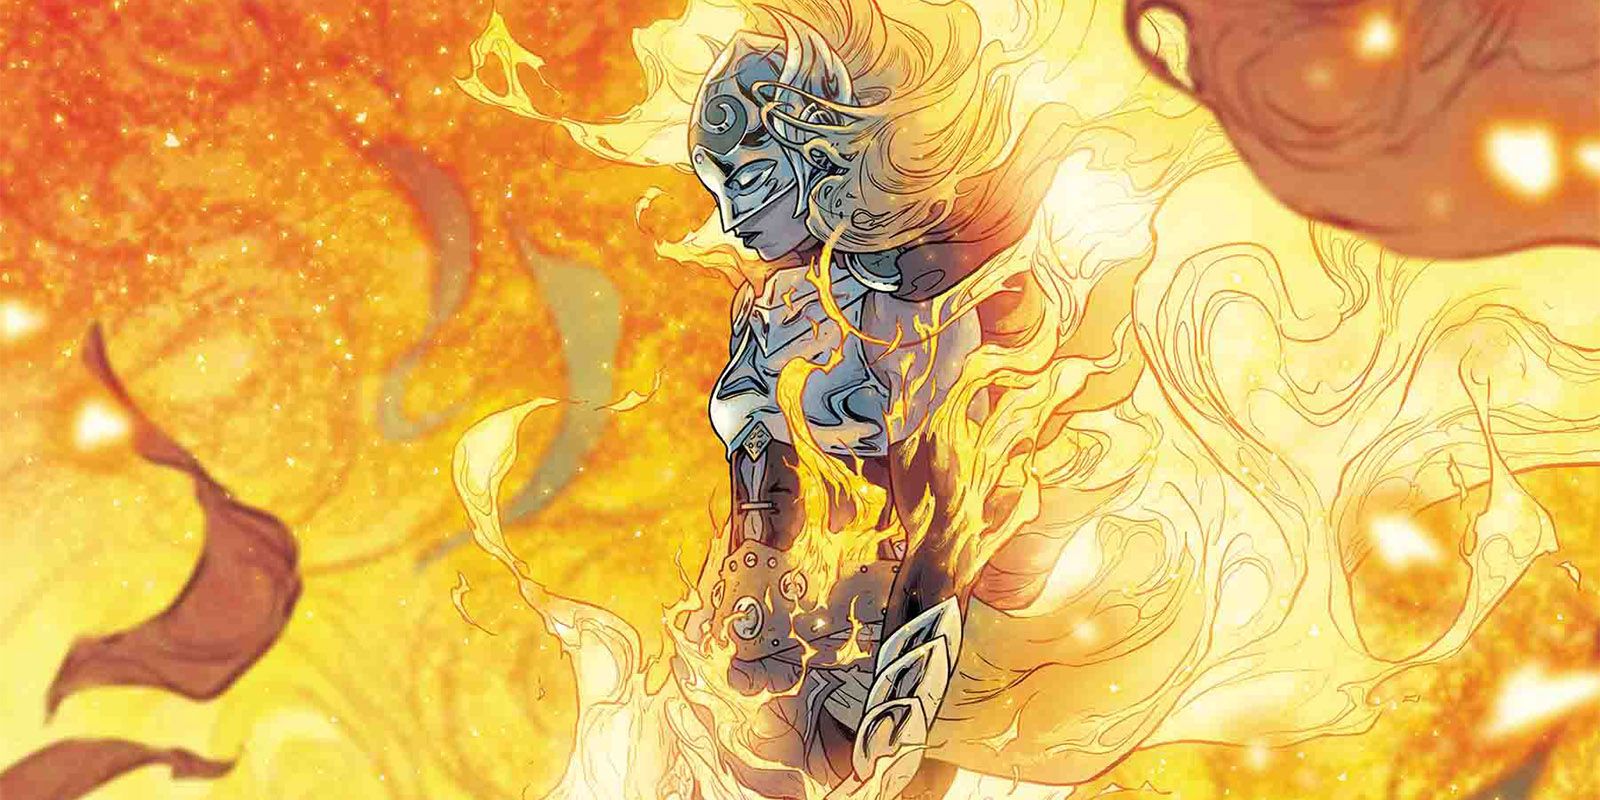 Jane Foster as The Mighty Thor stands among flames in Marvel Comics